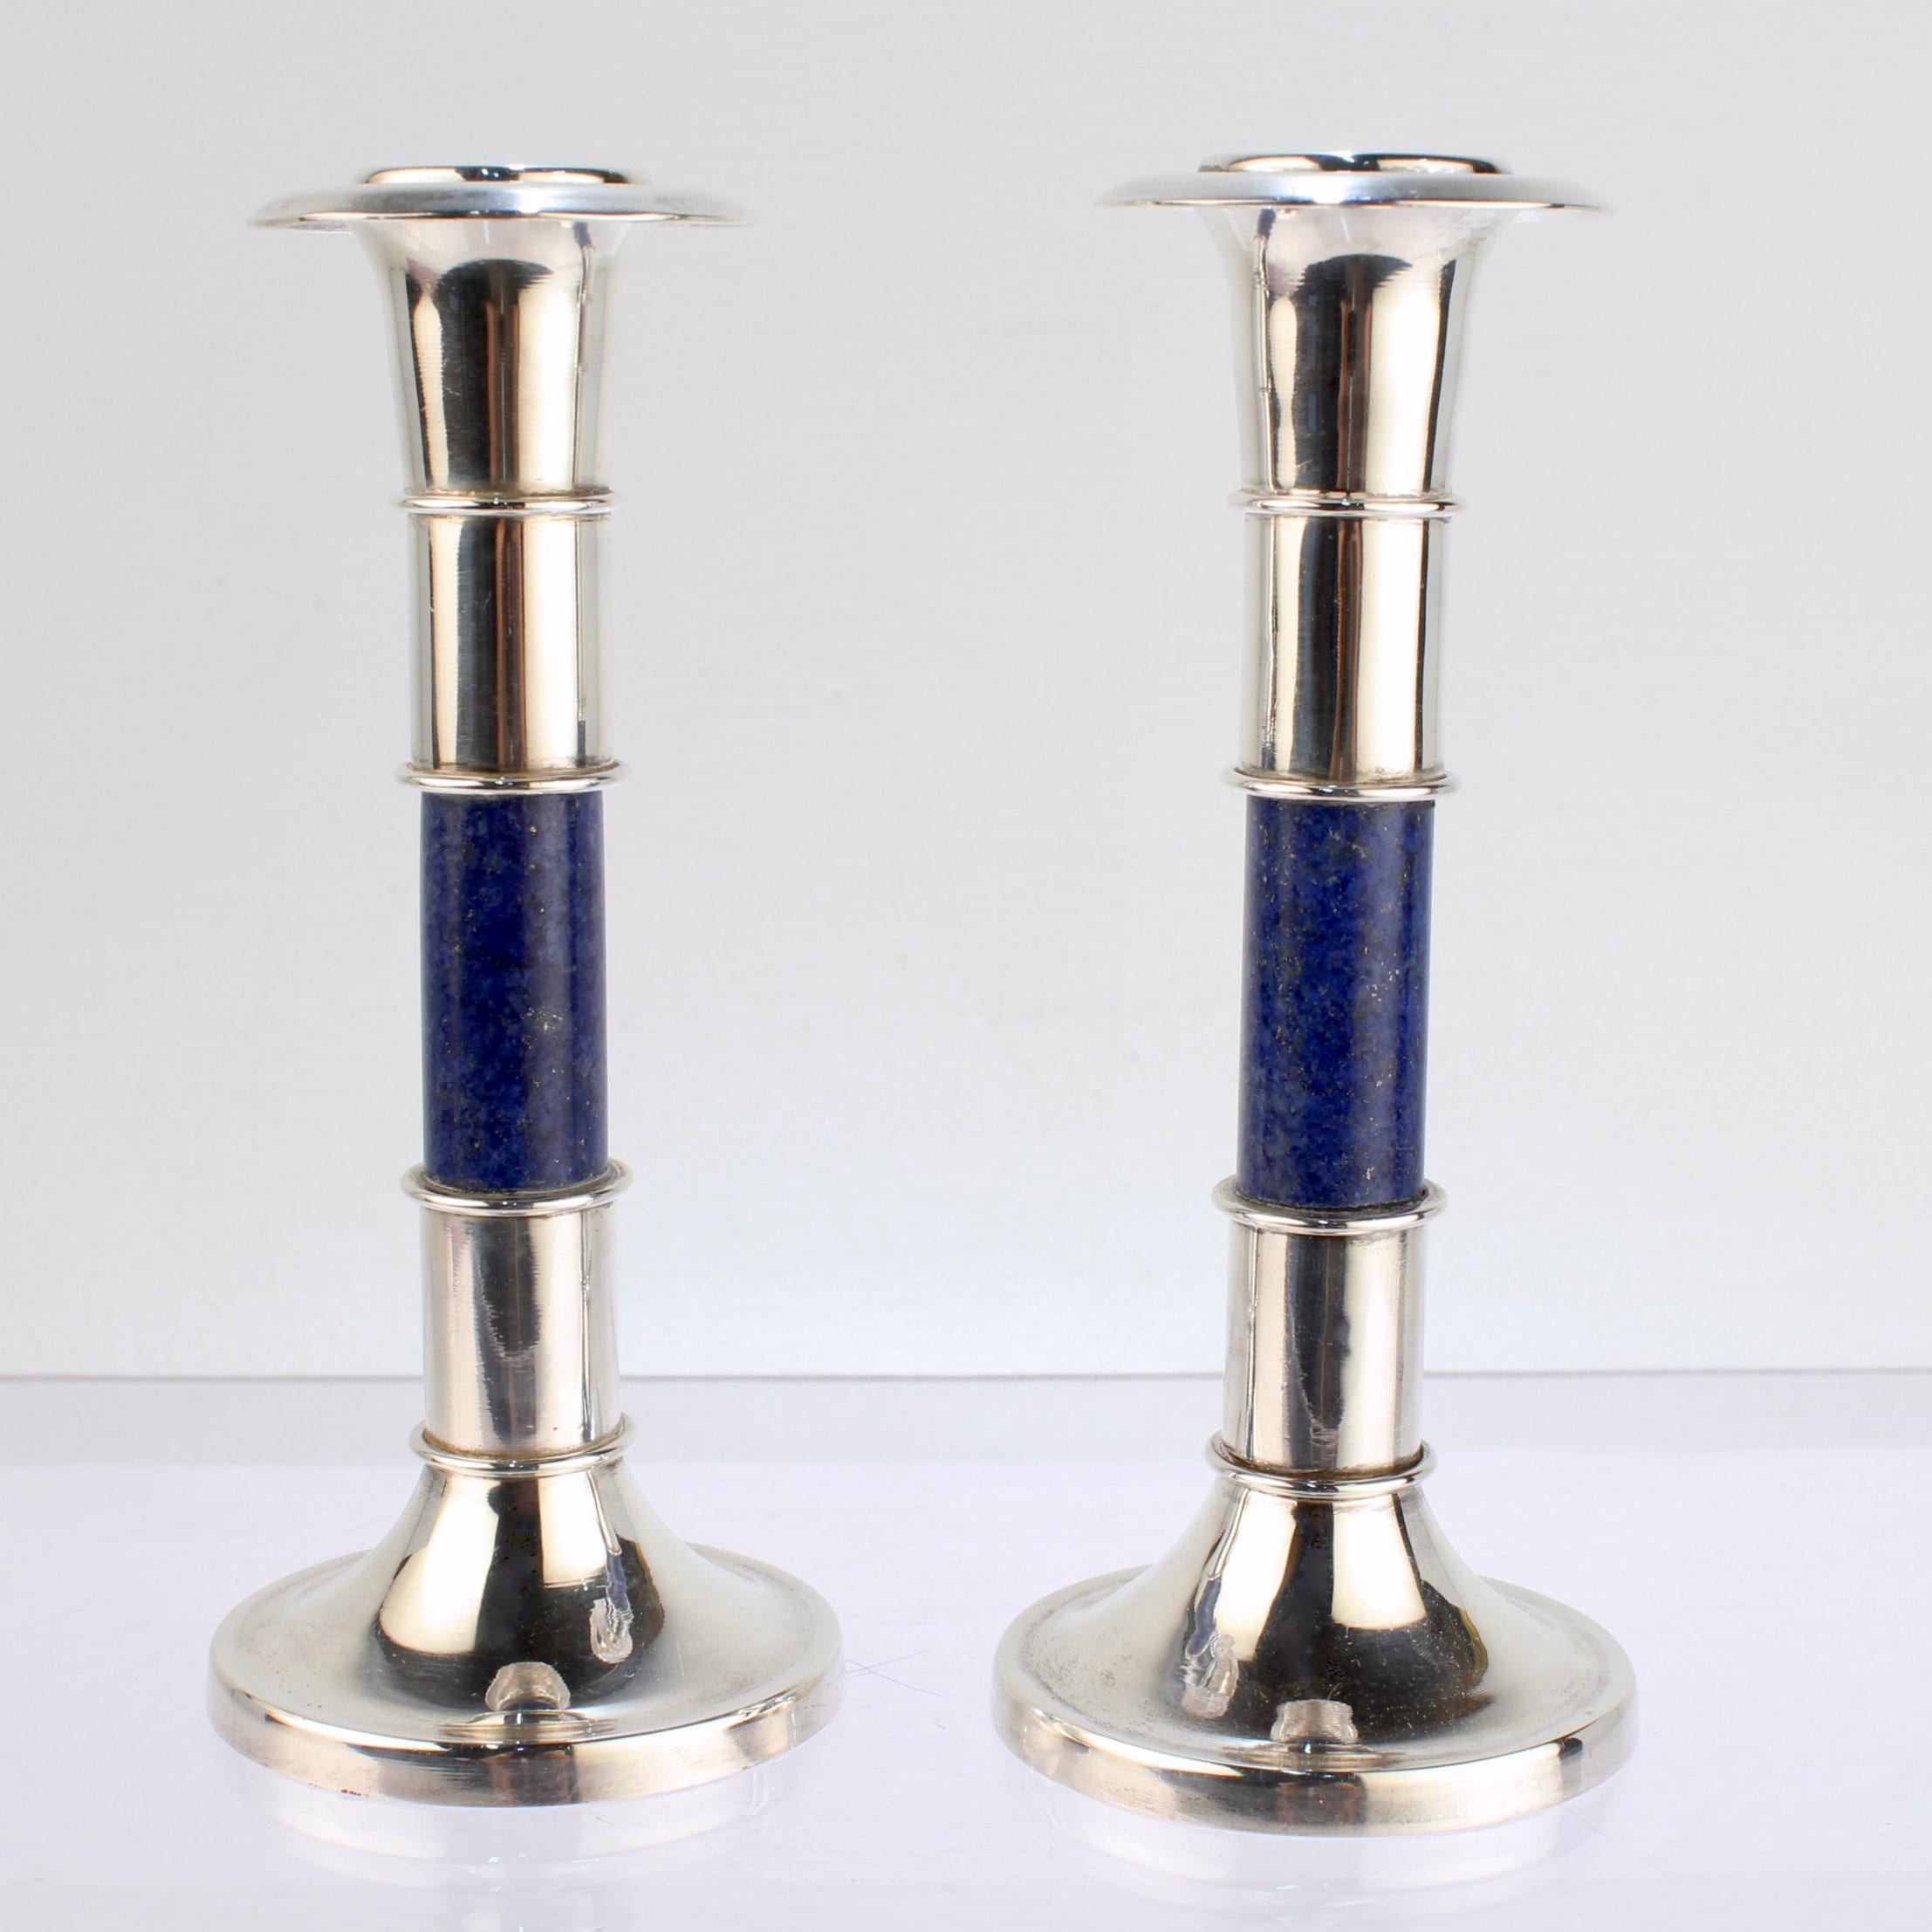 Modern Pair of Sterling Silver & Lapis Lazuli Candlesticks or Candle Holders